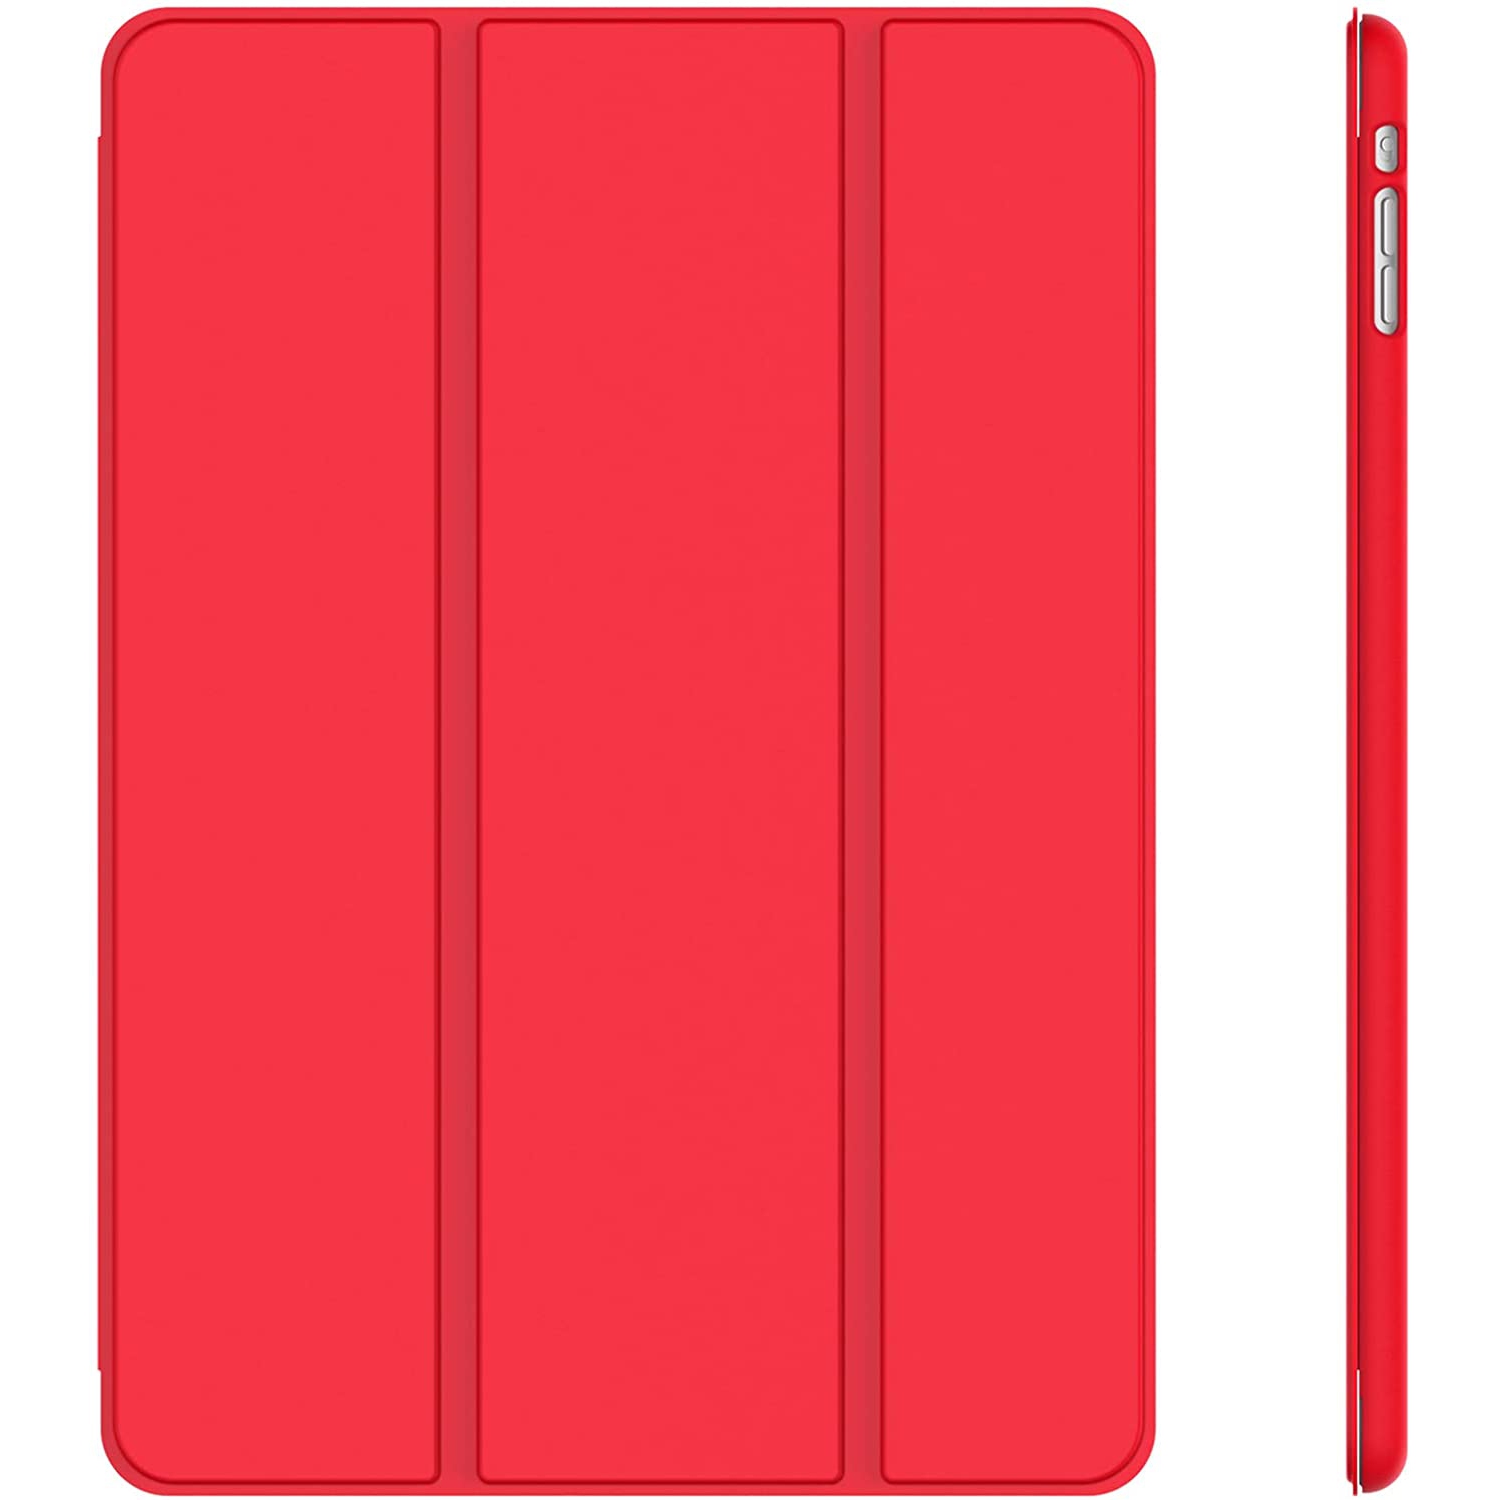 Case for iPad Mini 1 2 3 (NOT for iPad Mini 4), Smart Cover with 